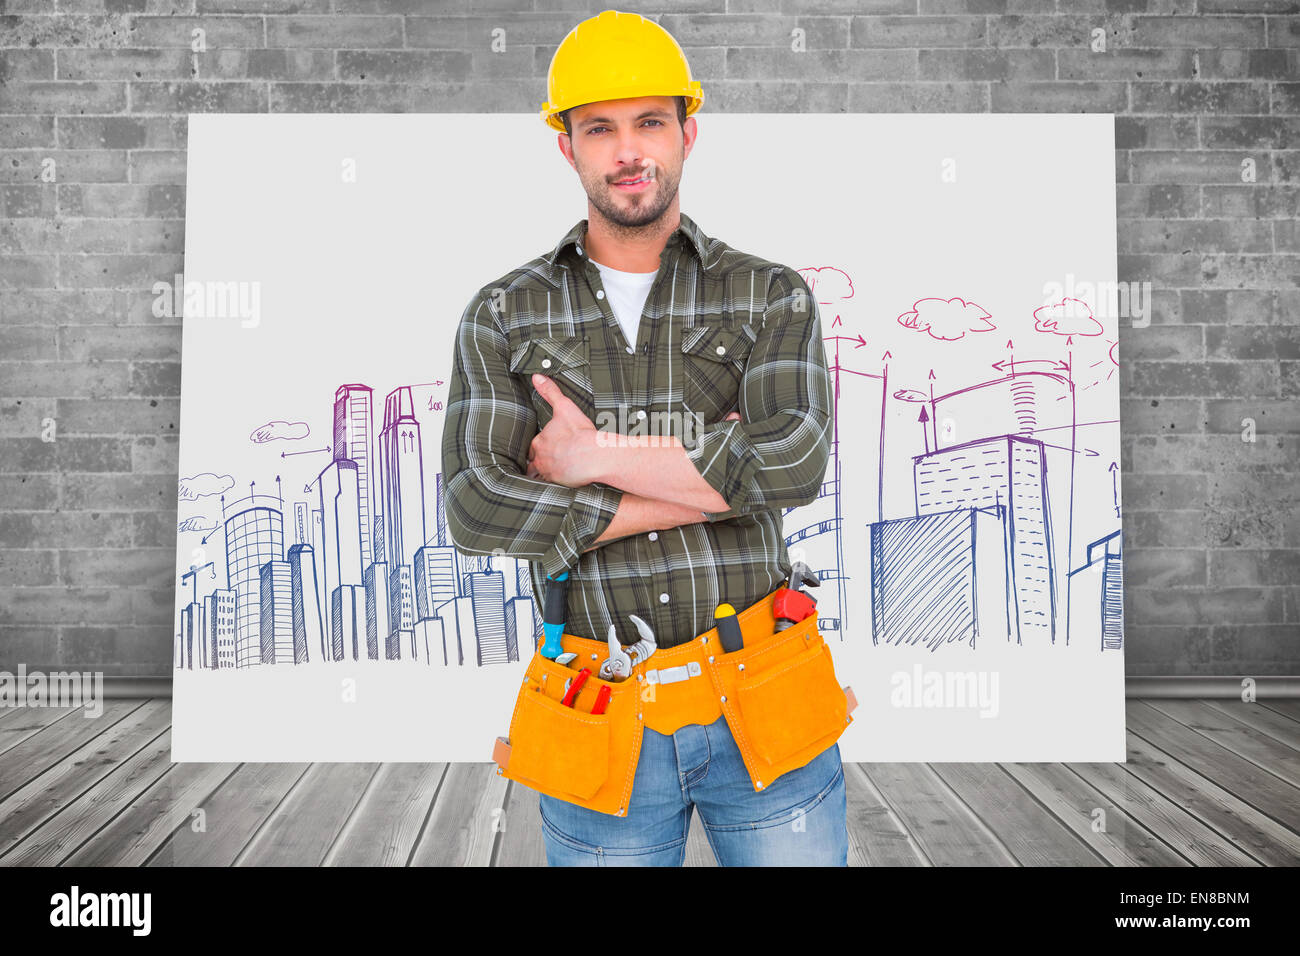 Composite image of manual worker with tool belt Stock Photo